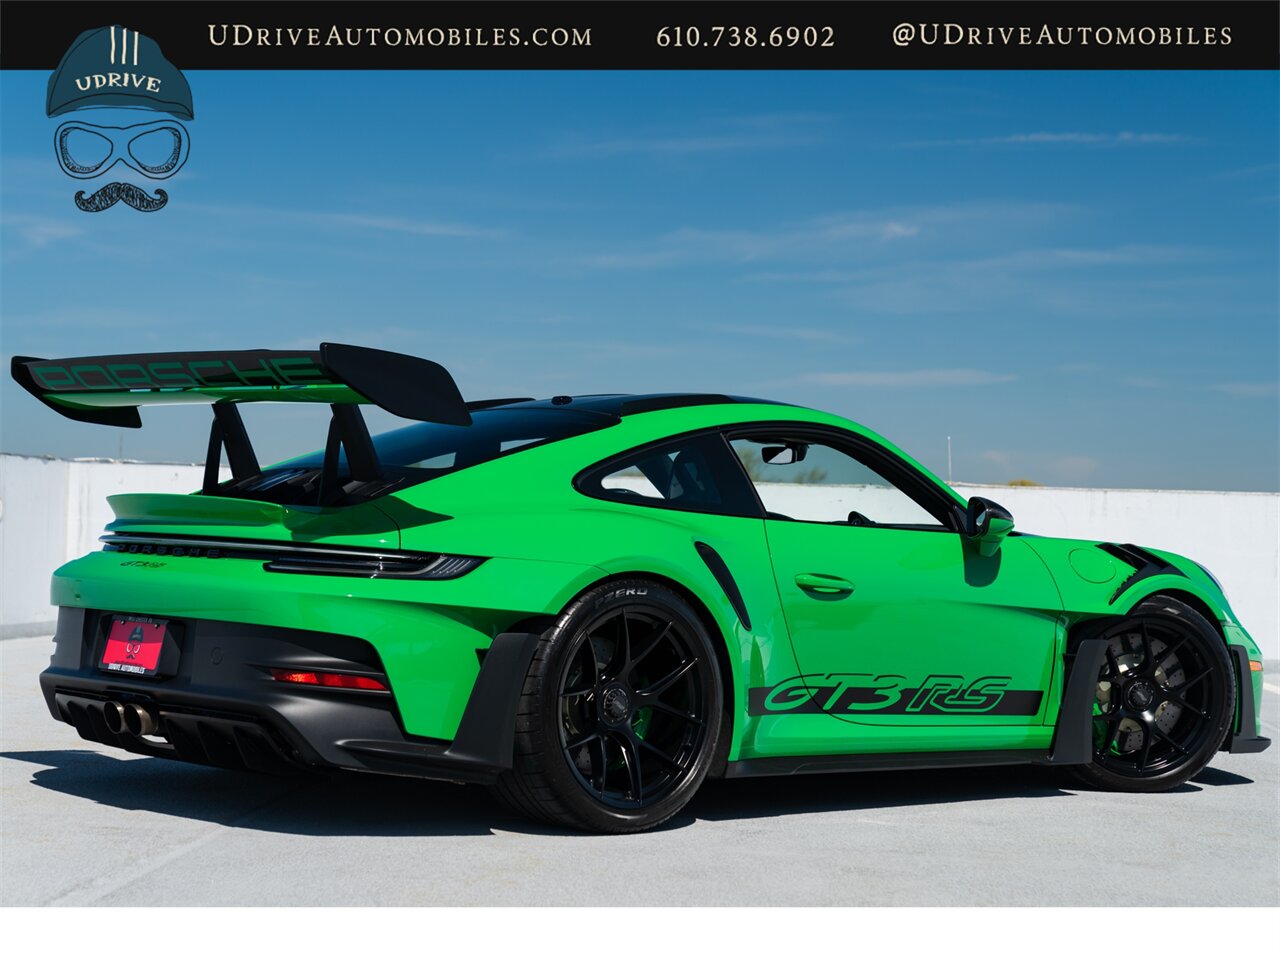 2023 Porsche 911 GT3 RS  Weissach Pkg FAL Full Body PPF $43k in Extras - Photo 2 - West Chester, PA 19382